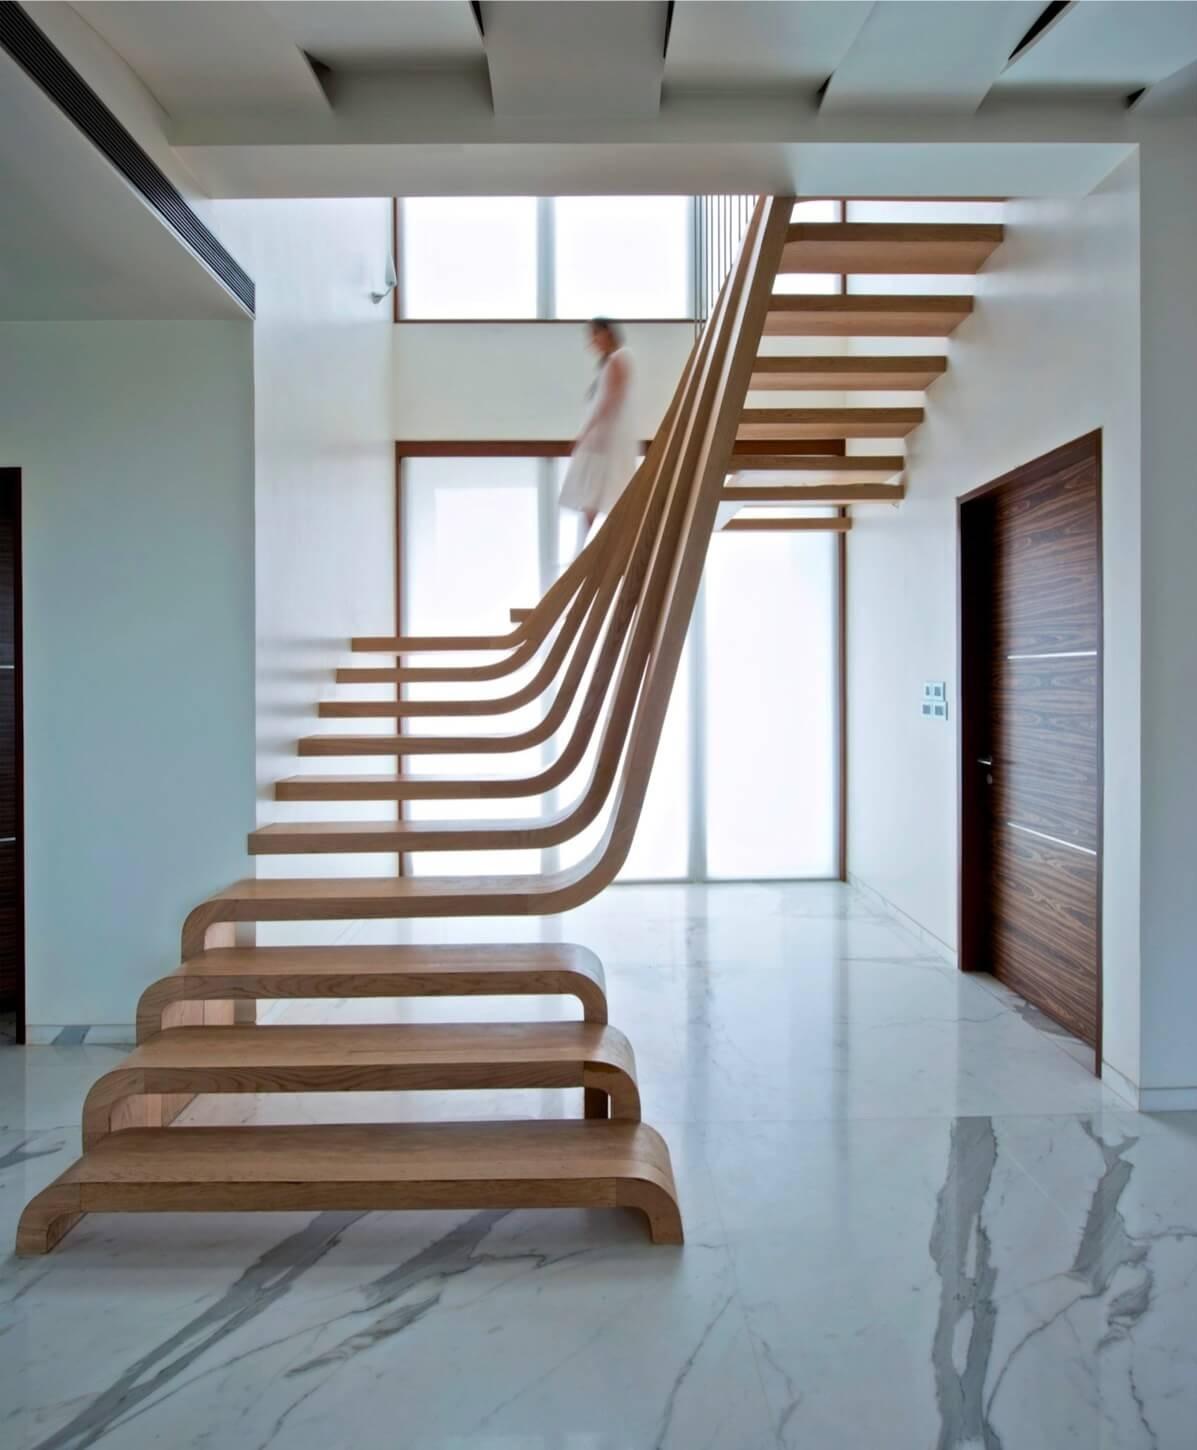 L-shaped stairs made of light brown hardwood, evenly spaced, small space staircase design